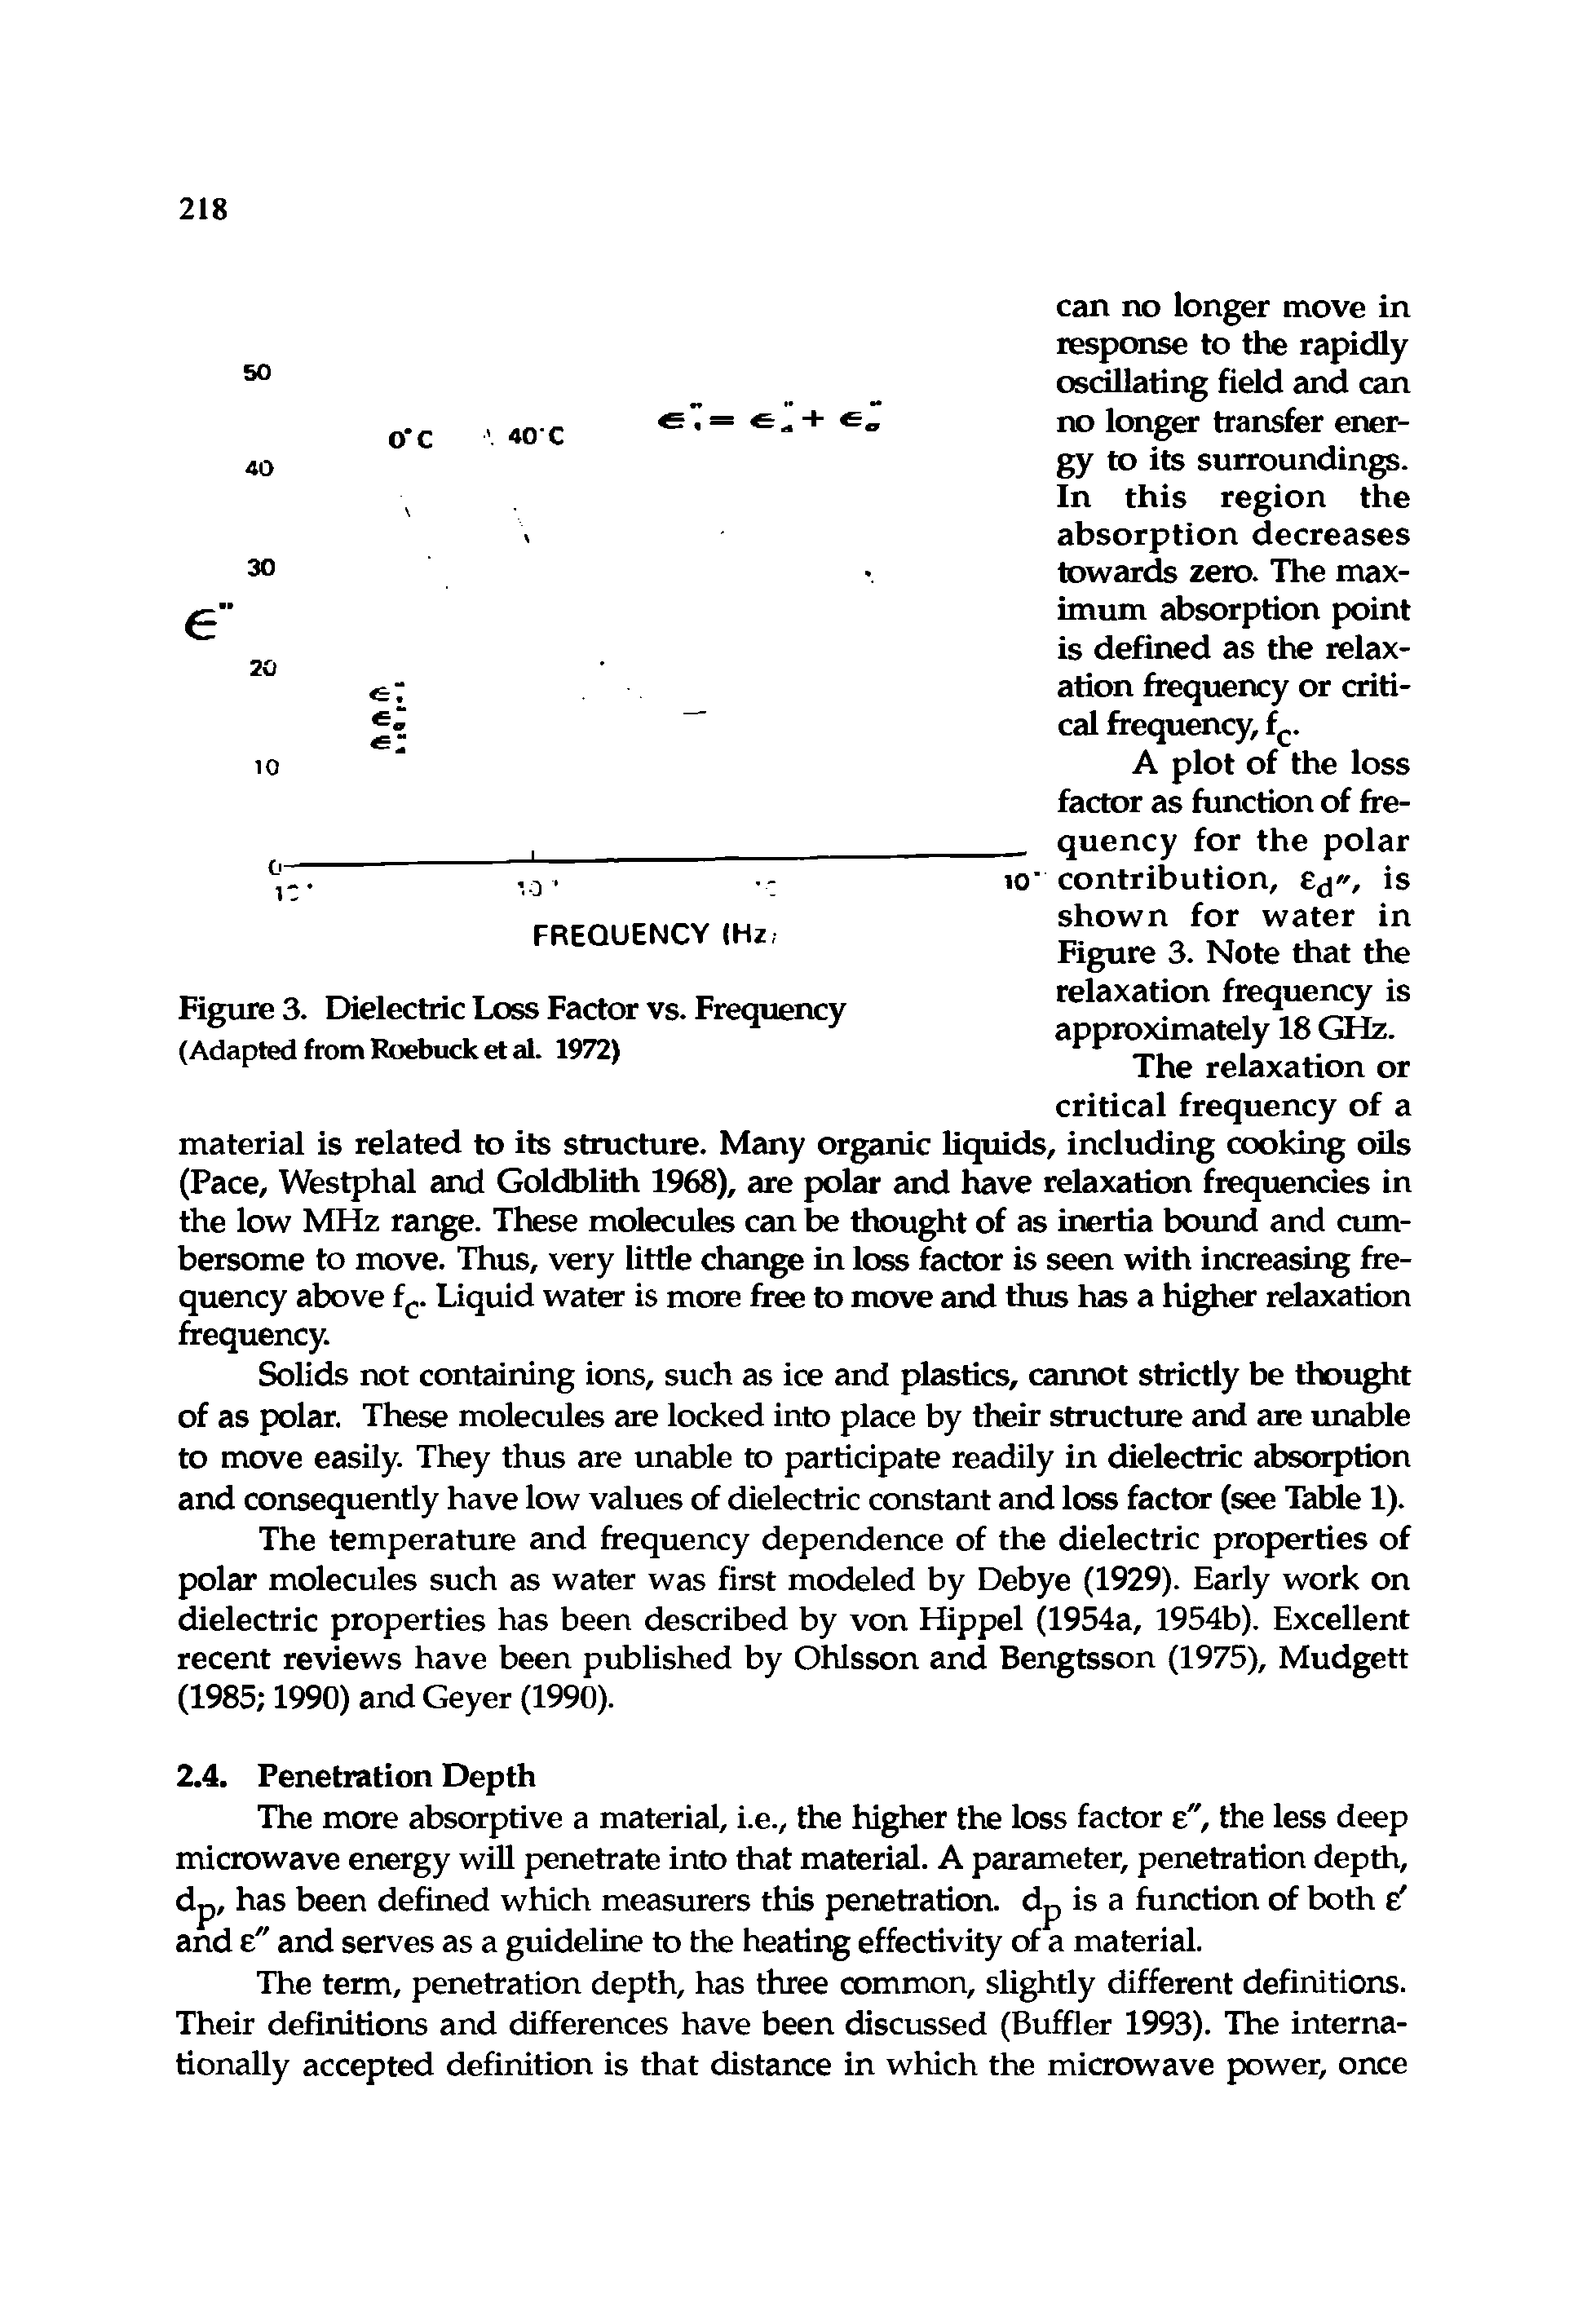 Figure 3. Dielectric Loss Factor vs. Frequency (Adapted from Roebuck et al. 1972)...